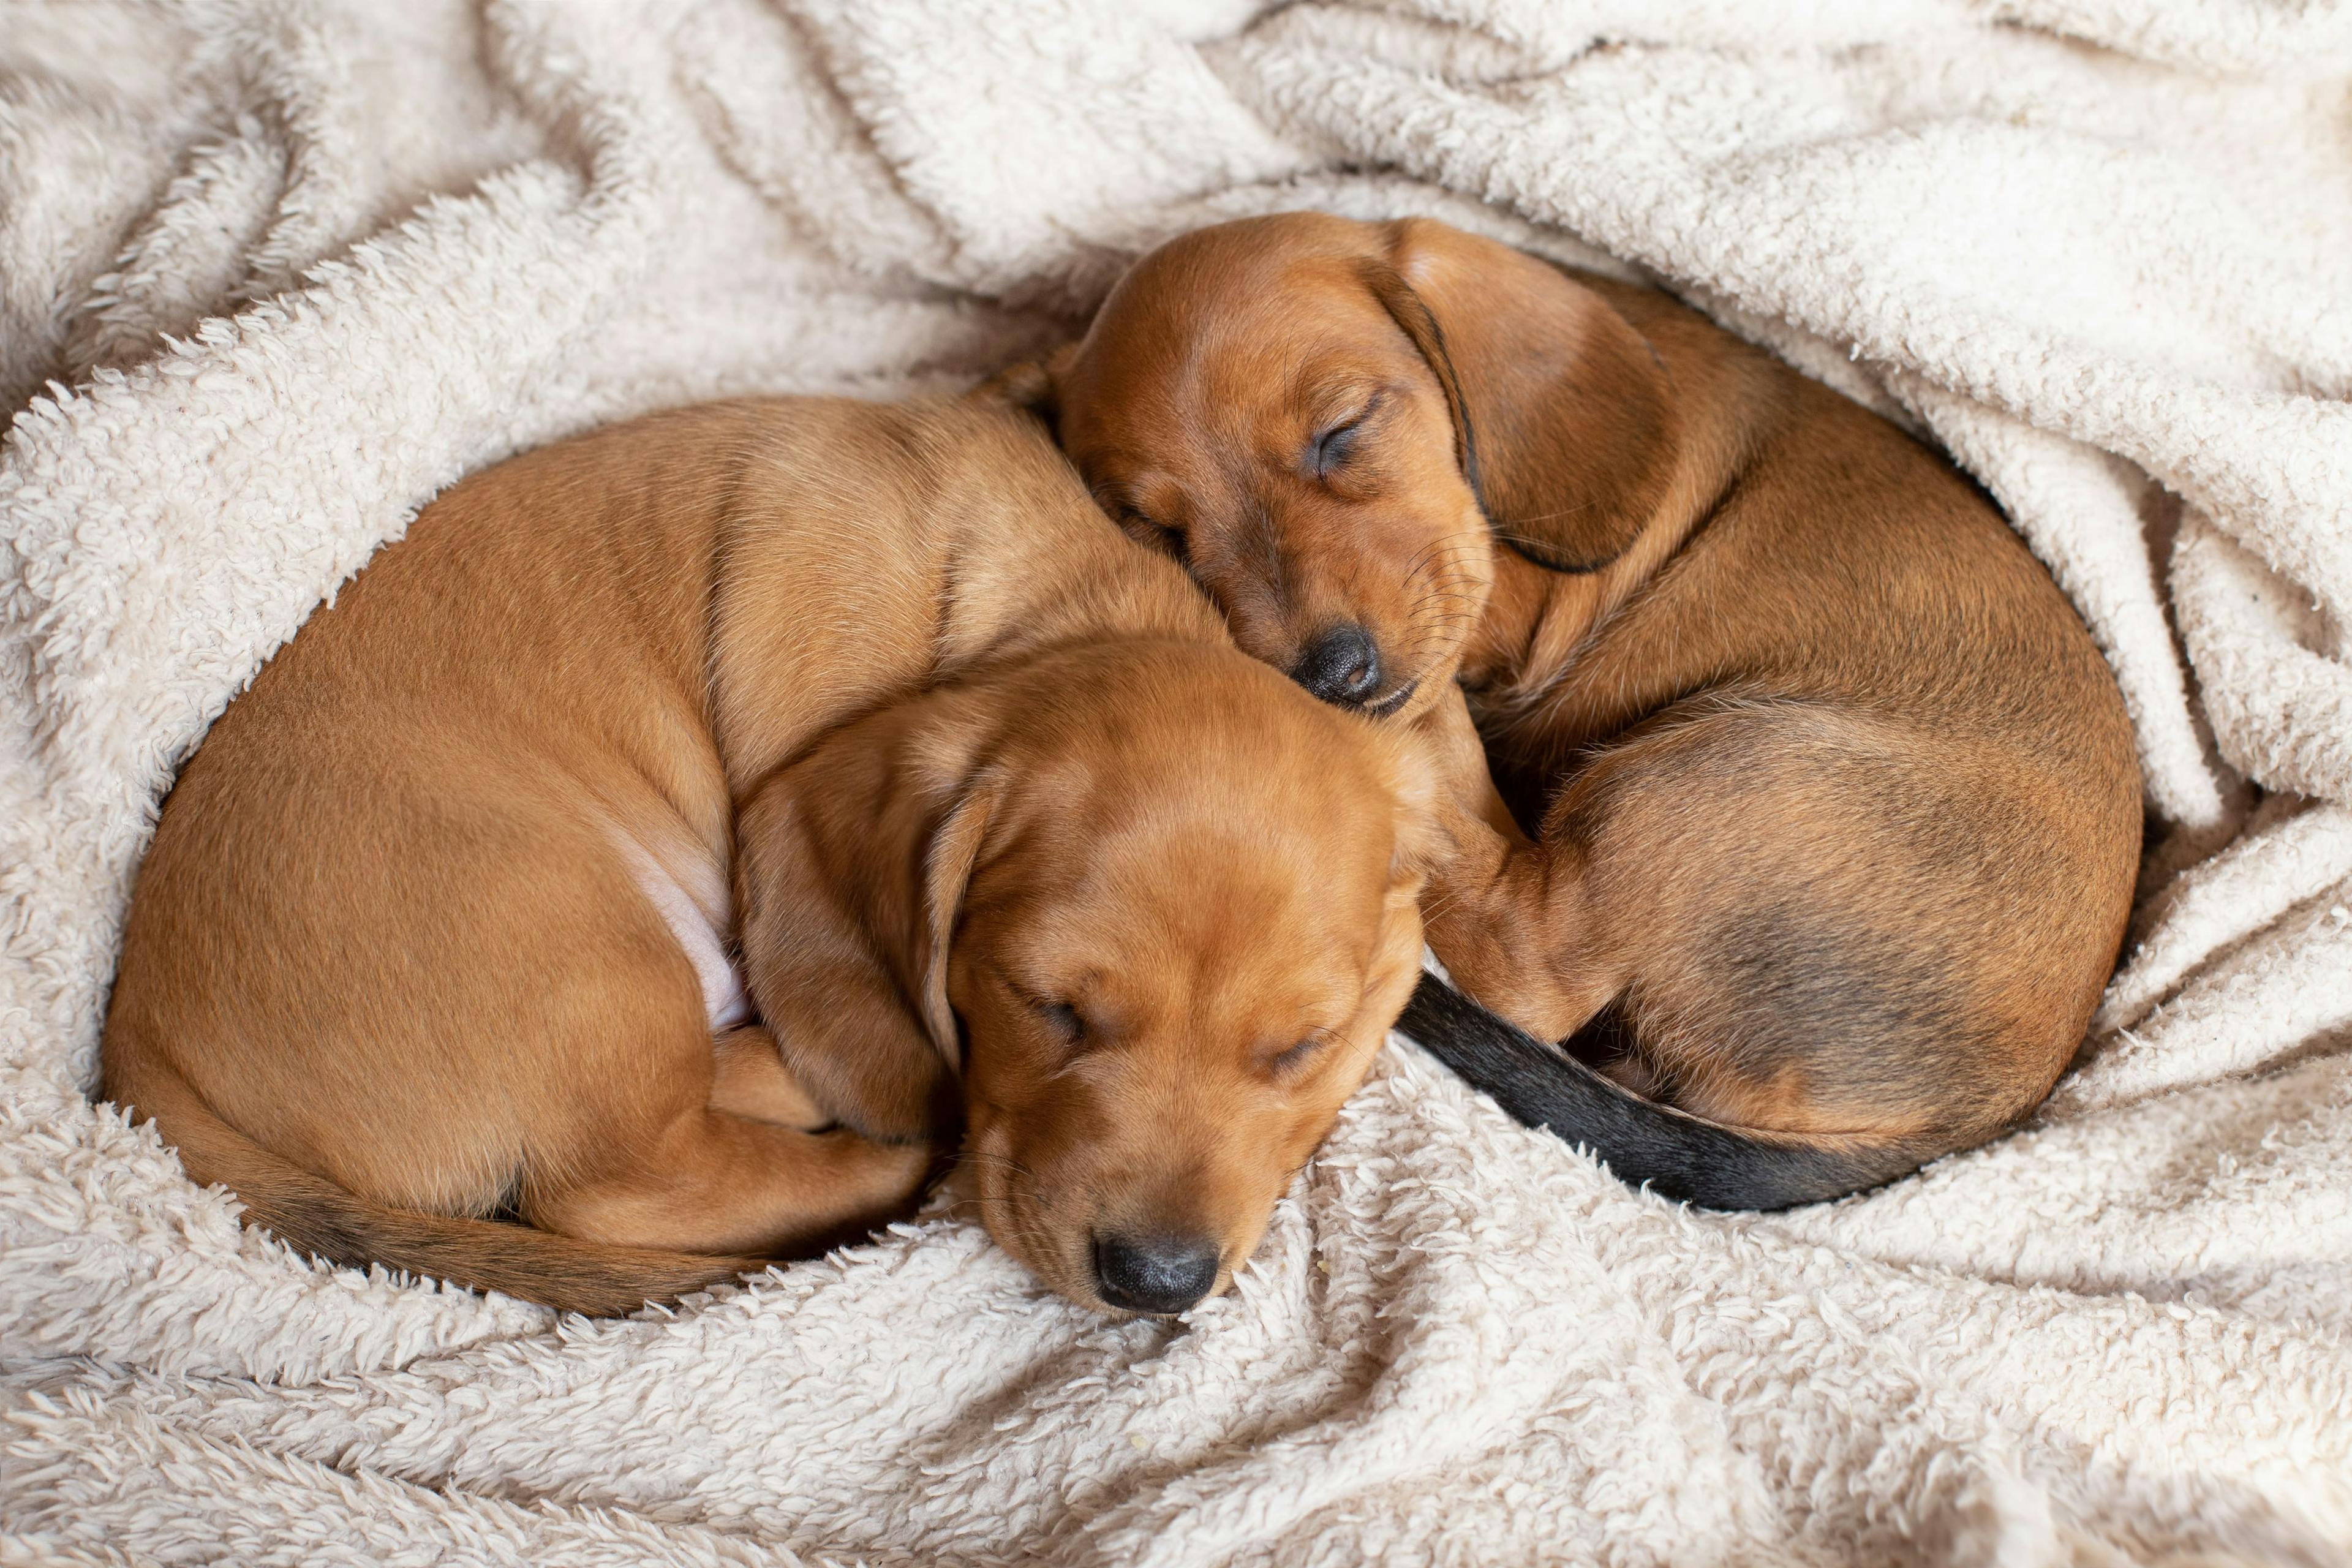 DaycareNaptime_Dogs: Dogs resting on cozy beds during naptime at the pet daycare center